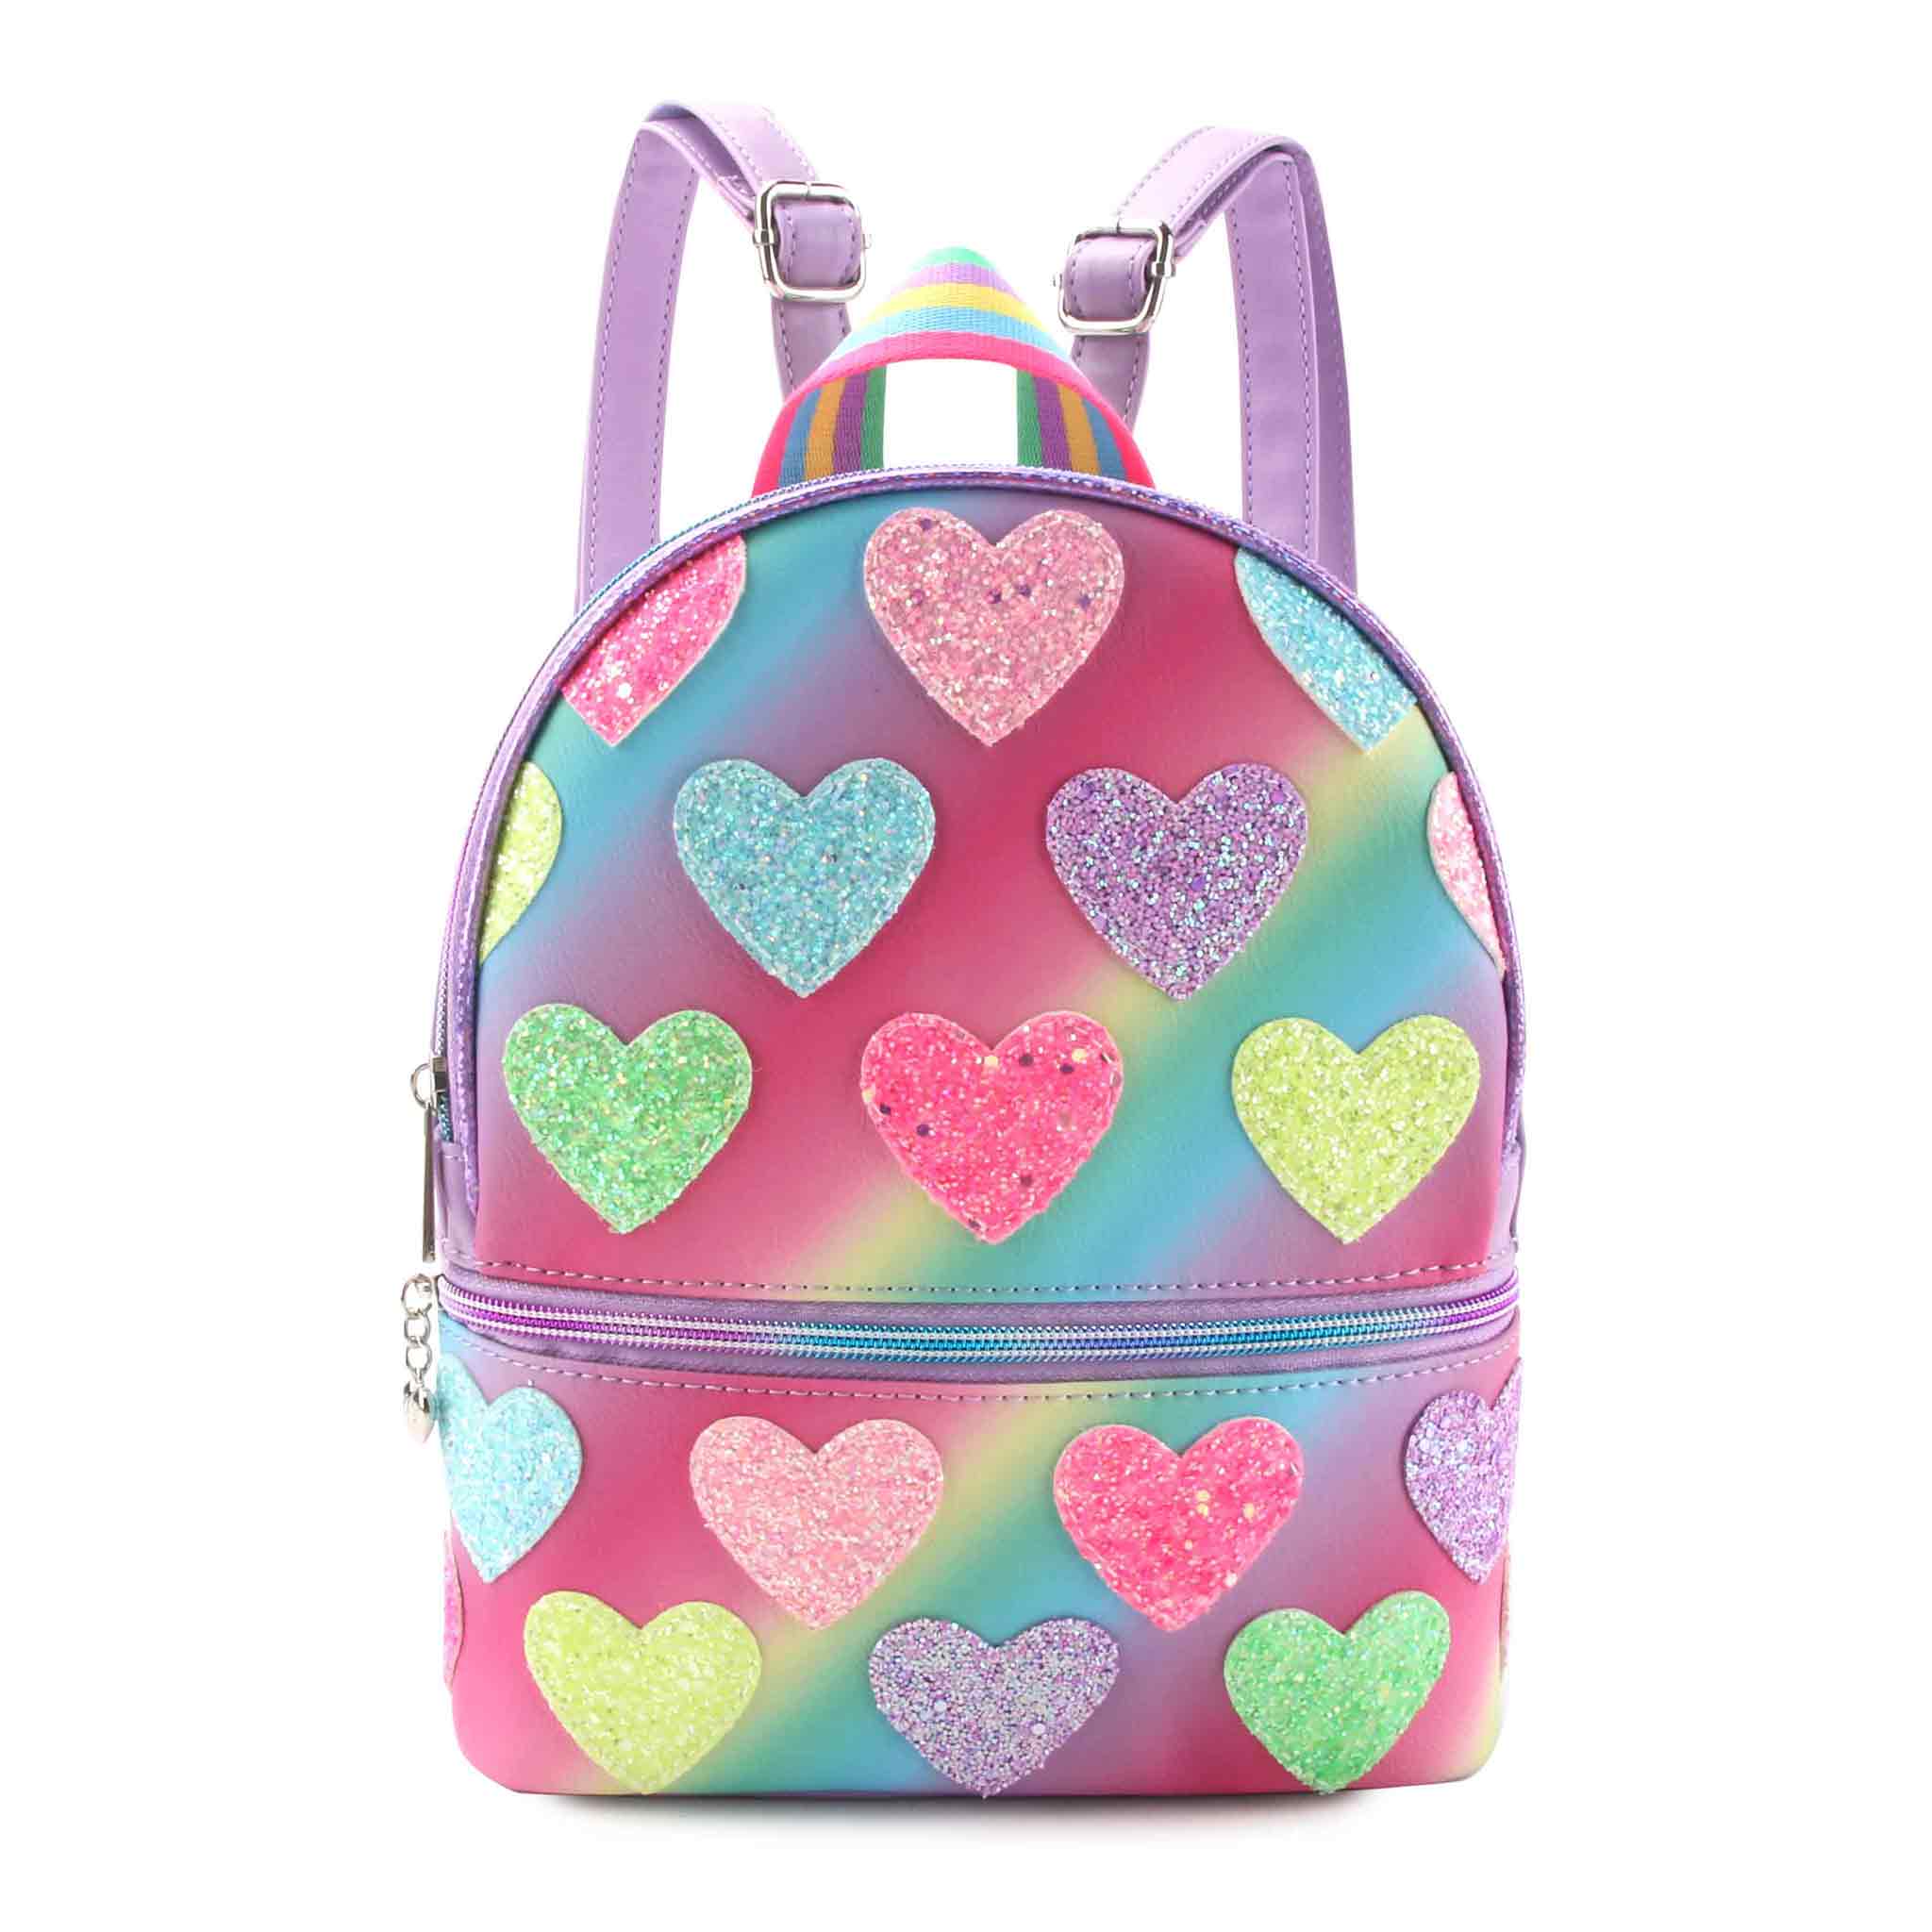 Front view of a ombre rainbow mini backpack with glitter rainbow heart patches